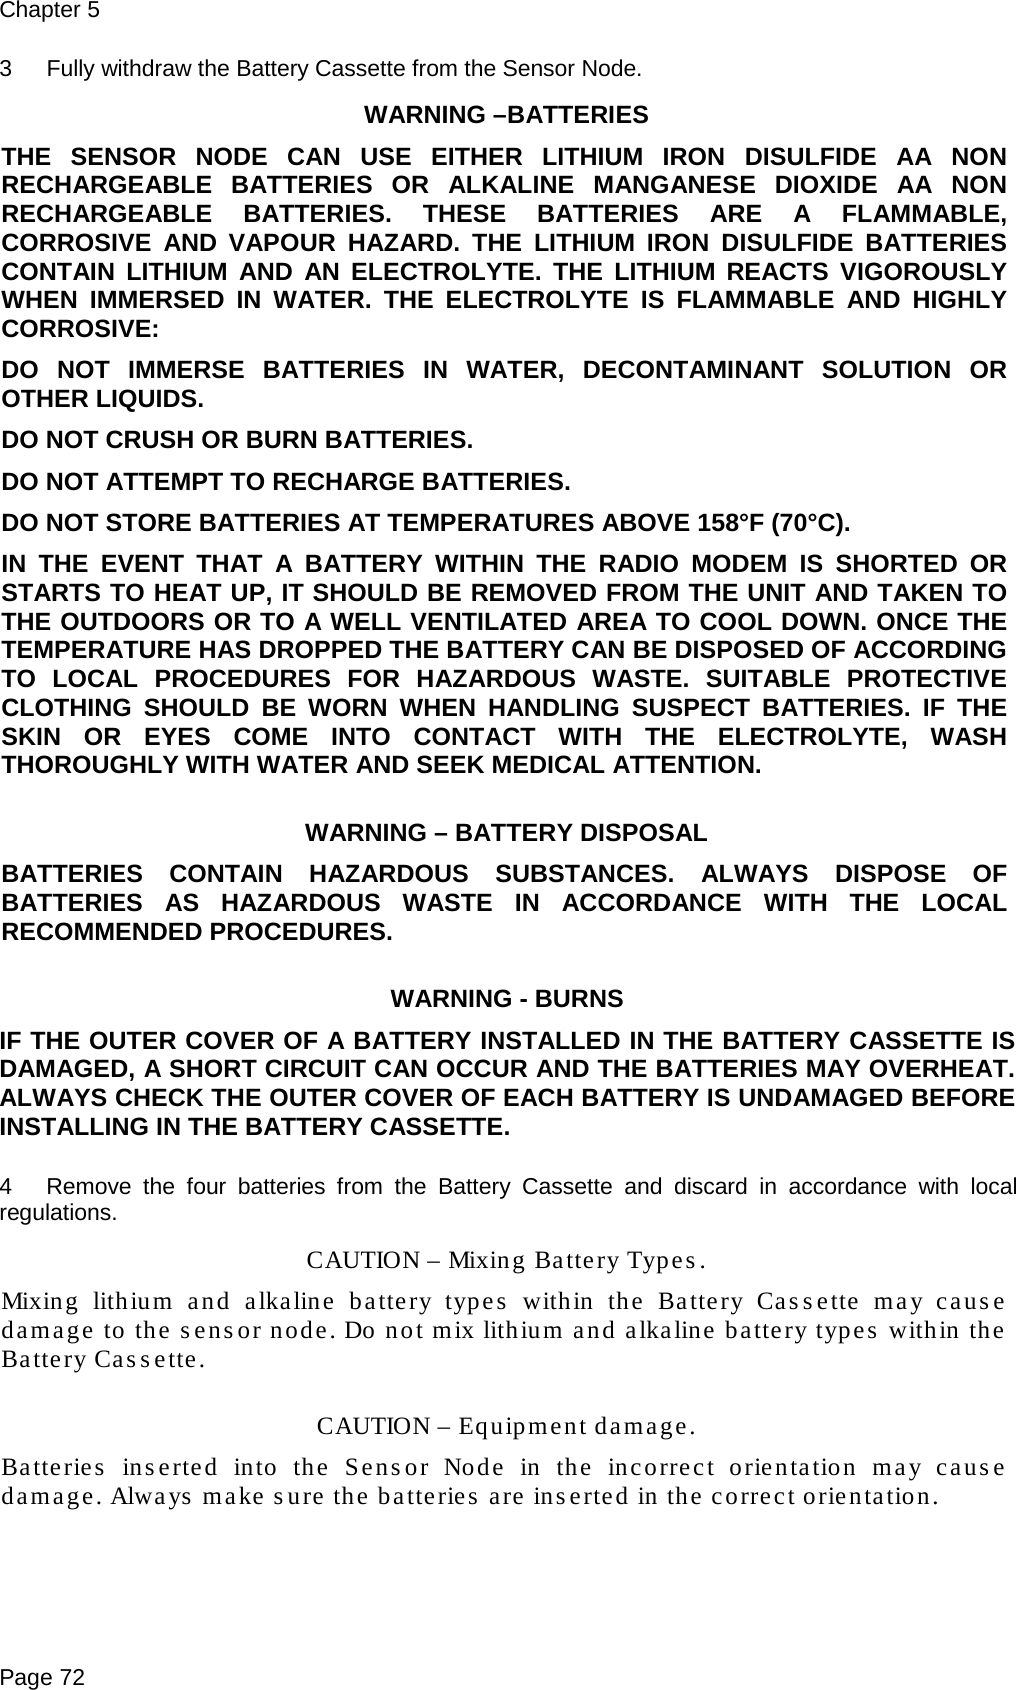 Chapter 5 Page 72 3  Fully withdraw the Battery Cassette from the Sensor Node. WARNING –BATTERIES  THE SENSOR NODE CAN USE EITHER LITHIUM IRON  DISULFIDE AA NON RECHARGEABLE BATTERIES OR ALKALINE MANGANESE DIOXIDE AA NON RECHARGEABLE BATTERIES. THESE BATTERIES ARE A FLAMMABLE, CORROSIVE AND VAPOUR HAZARD. THE LITHIUM IRON DISULFIDE BATTERIES CONTAIN LITHIUM AND AN ELECTROLYTE. THE LITHIUM REACTS VIGOROUSLY WHEN IMMERSED IN WATER. THE ELECTROLYTE IS FLAMMABLE AND HIGHLY CORROSIVE: DO NOT IMMERSE BATTERIES IN WATER, DECONTAMINANT SOLUTION OR OTHER LIQUIDS. DO NOT CRUSH OR BURN BATTERIES. DO NOT ATTEMPT TO RECHARGE BATTERIES. DO NOT STORE BATTERIES AT TEMPERATURES ABOVE 158°F (70°C). IN THE EVENT THAT A BATTERY WITHIN THE RADIO MODEM IS SHORTED OR STARTS TO HEAT UP, IT SHOULD BE REMOVED FROM THE UNIT AND TAKEN TO THE OUTDOORS OR TO A WELL VENTILATED AREA TO COOL DOWN. ONCE THE TEMPERATURE HAS DROPPED THE BATTERY CAN BE DISPOSED OF ACCORDING TO LOCAL PROCEDURES FOR HAZARDOUS WASTE. SUITABLE PROTECTIVE CLOTHING SHOULD BE WORN WHEN HANDLING SUSPECT BATTERIES. IF THE SKIN OR EYES COME INTO CONTACT WITH THE ELECTROLYTE, WASH THOROUGHLY WITH WATER AND SEEK MEDICAL ATTENTION.  WARNING – BATTERY DISPOSAL BATTERIES CONTAIN HAZARDOUS SUBSTANCES. ALWAYS DISPOSE OF BATTERIES AS HAZARDOUS WASTE IN ACCORDANCE WITH THE LOCAL RECOMMENDED PROCEDURES.  WARNING - BURNS IF THE OUTER COVER OF A BATTERY INSTALLED IN THE BATTERY CASSETTE IS DAMAGED, A SHORT CIRCUIT CAN OCCUR AND THE BATTERIES MAY OVERHEAT. ALWAYS CHECK THE OUTER COVER OF EACH BATTERY IS UNDAMAGED BEFORE INSTALLING IN THE BATTERY CASSETTE.  4  Remove the four batteries from the Battery Cassette and discard in accordance with local regulations. CAUTION – Mixing Battery Types. Mixing lithium and alkaline battery types within the Battery Cassette may cause damage to the sensor node. Do not mix lithium and alkaline battery types within the Battery Cassette.  CAUTION – Equipment damage. Batteries inserted into the Sensor Node in the incorrect orientation may cause damage. Always make sure the batteries are inserted in the correct orientation.  